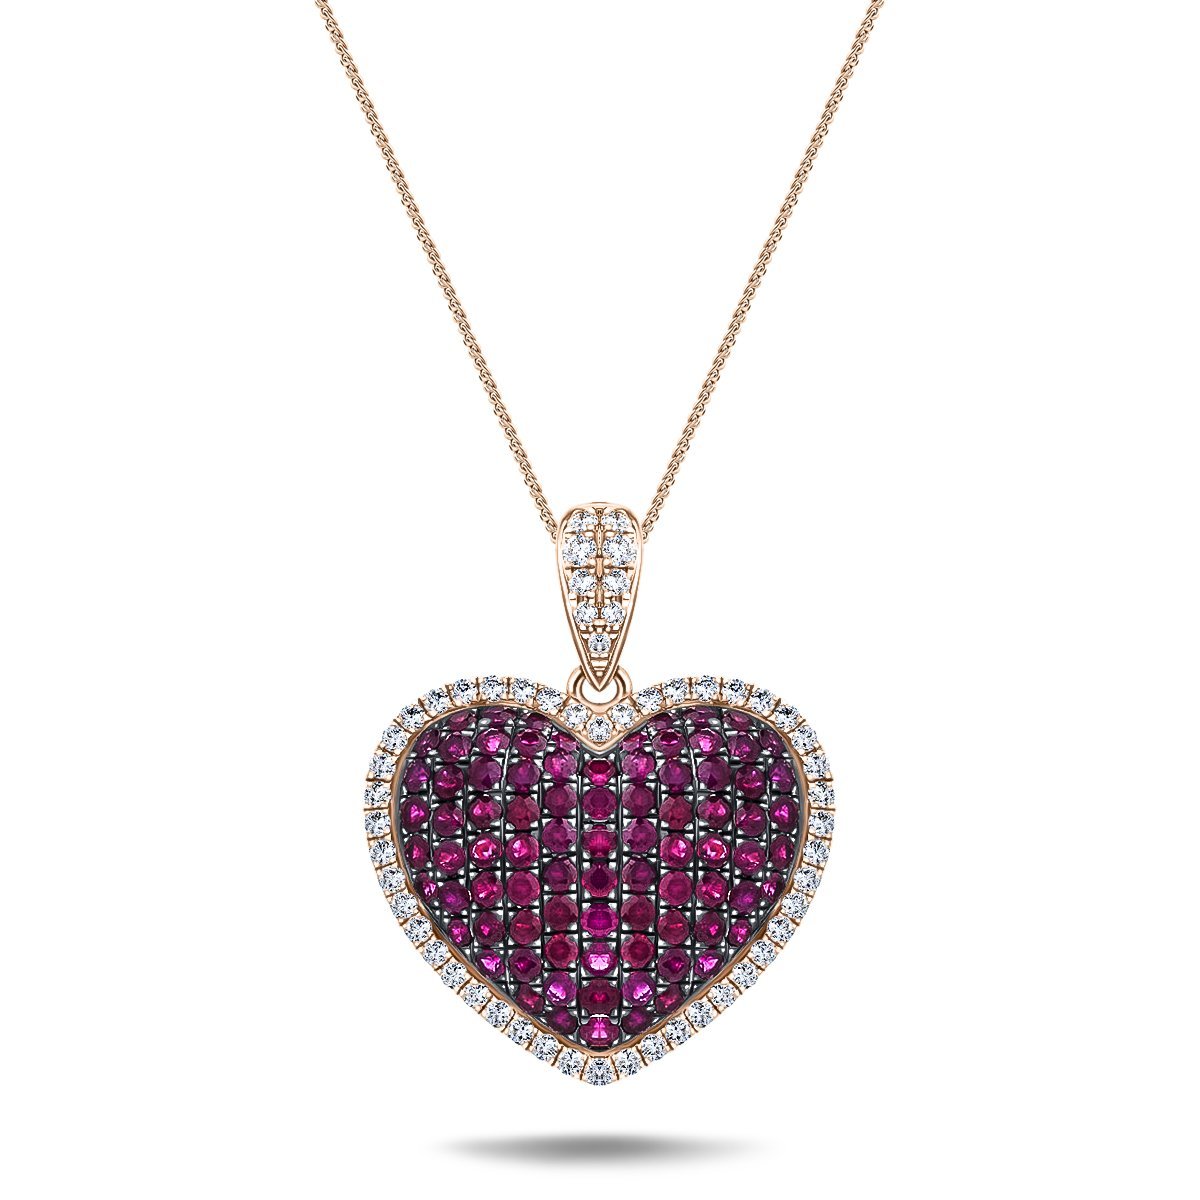 1.67ct Ruby & 0.43ct Diamond Heart Shaped Necklace in 18k Rose Gold - All Diamond